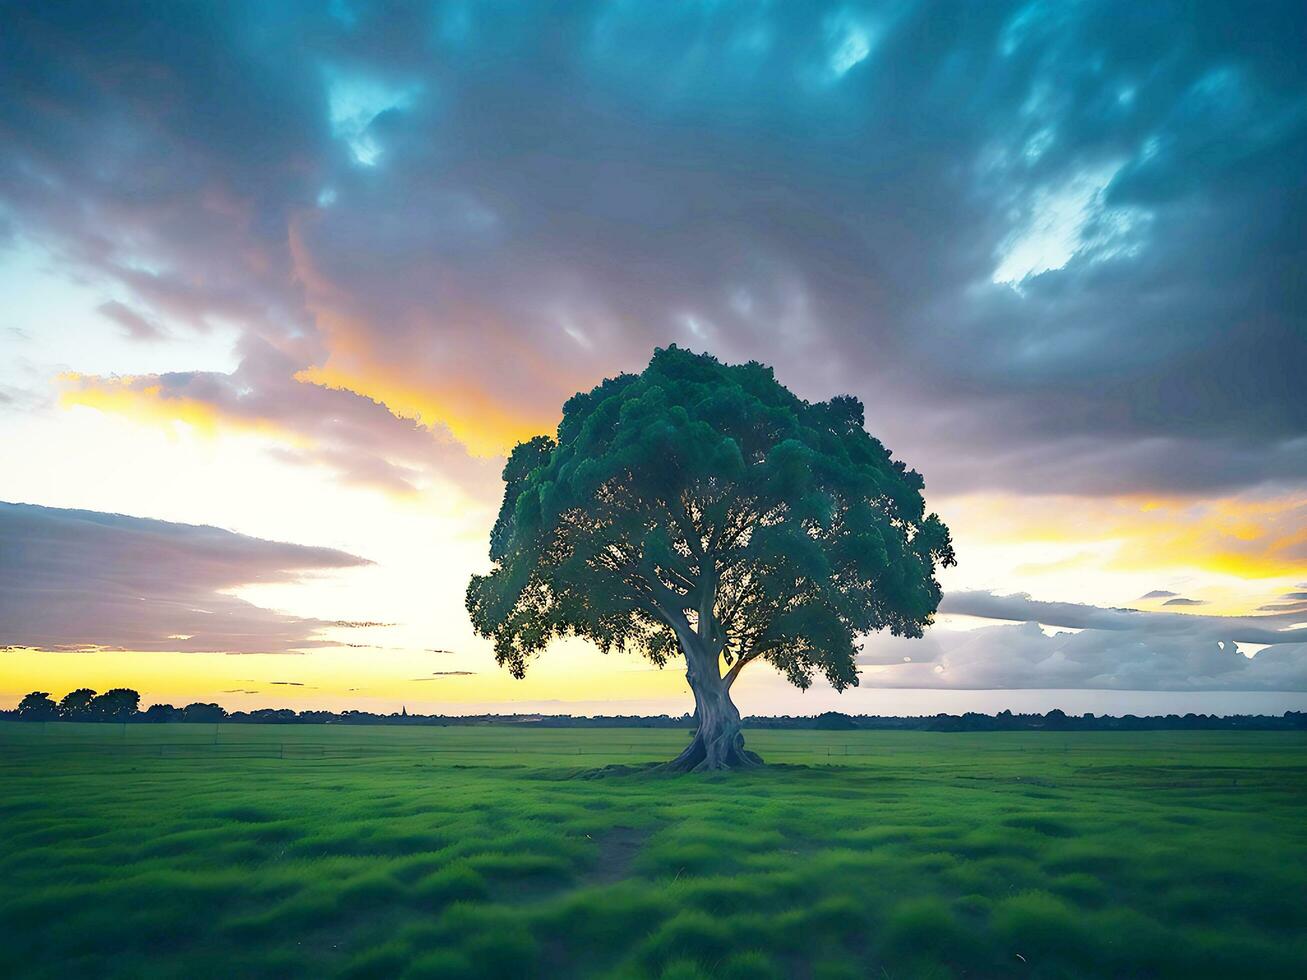 Free photo wide angle shot of a single tree growing under a clouded sky during a sunset surrounded by grass